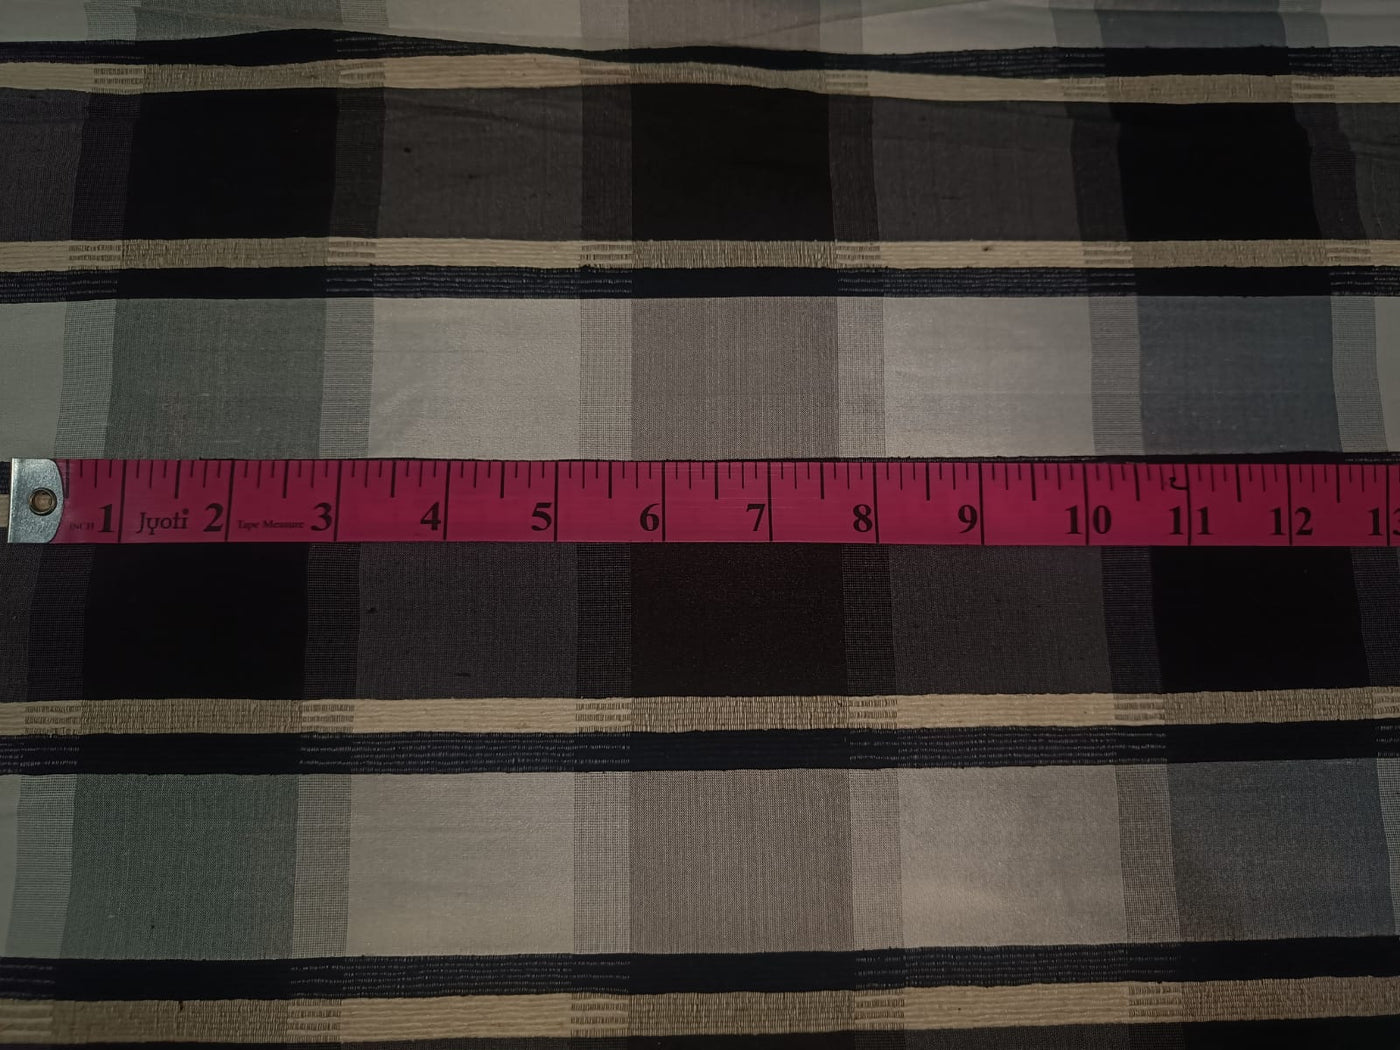 Silk Dupioni Fabric Plaids black grey and white color 54" wide DUP#C99[1]